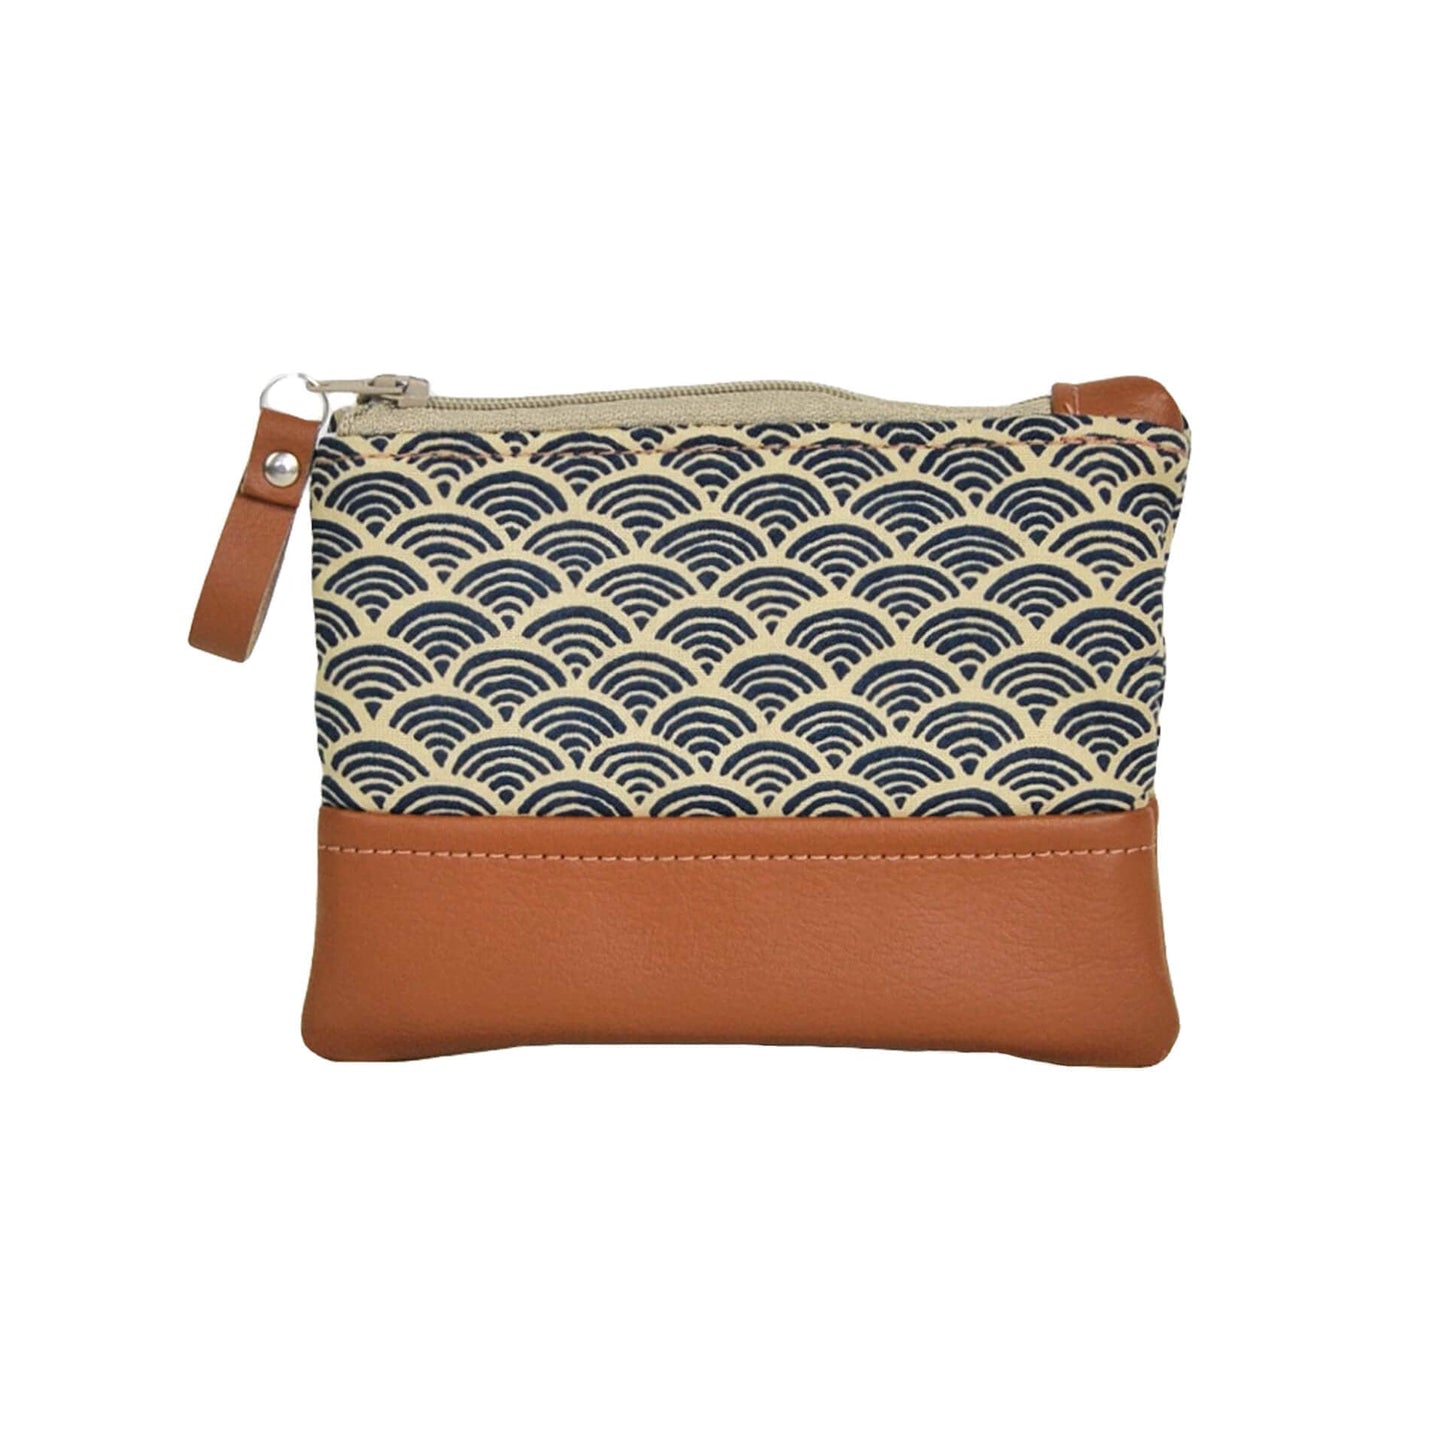 Lauren Holloway Purse / Wallet Coin Purse (various styles and sizes)